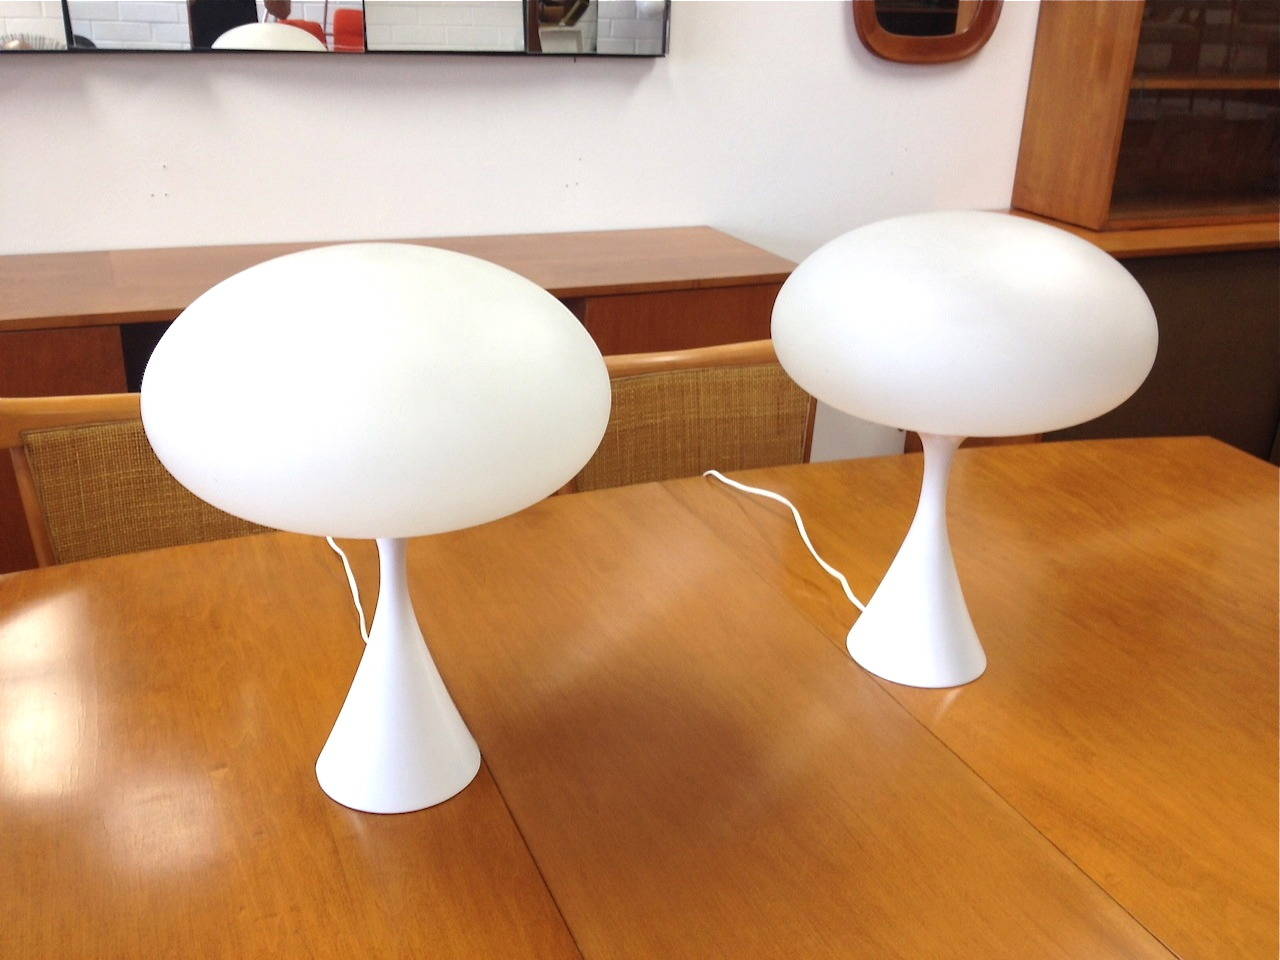 Pair of Laurel Mushroom table lamps. Bases have been professionally restored. Glass shades are original.